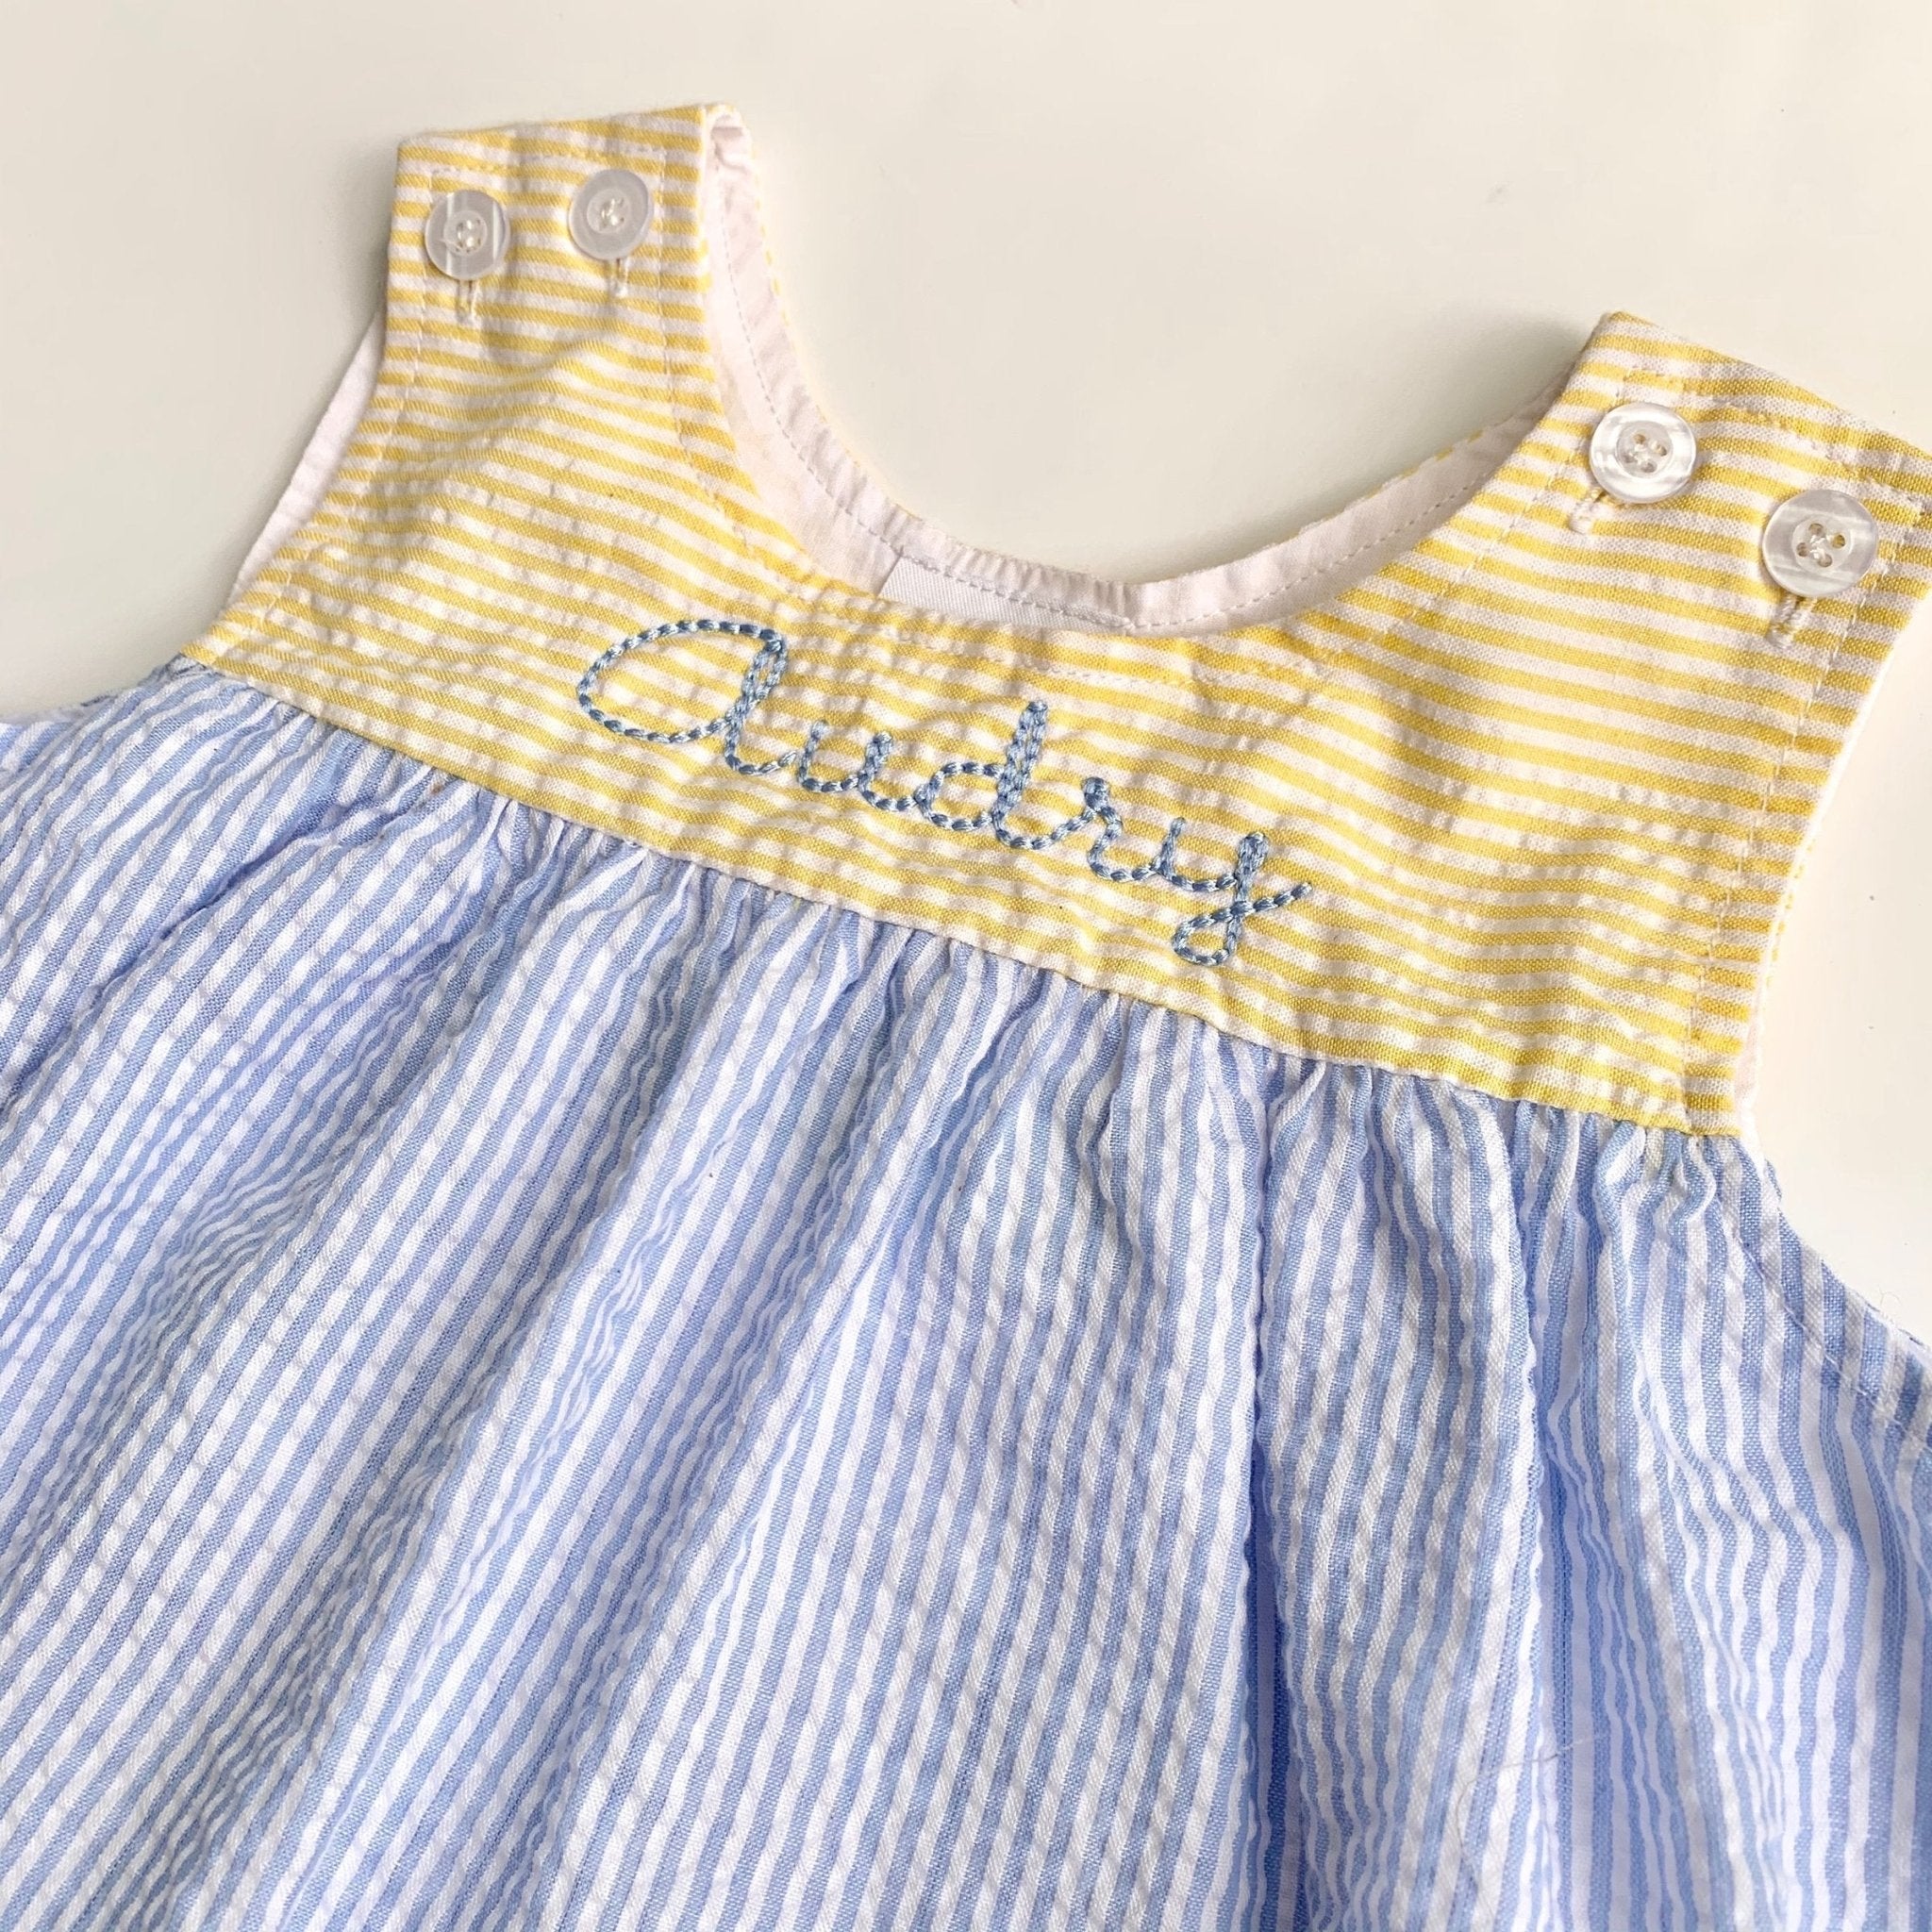 Children's Clothing - So & Sew Boutique